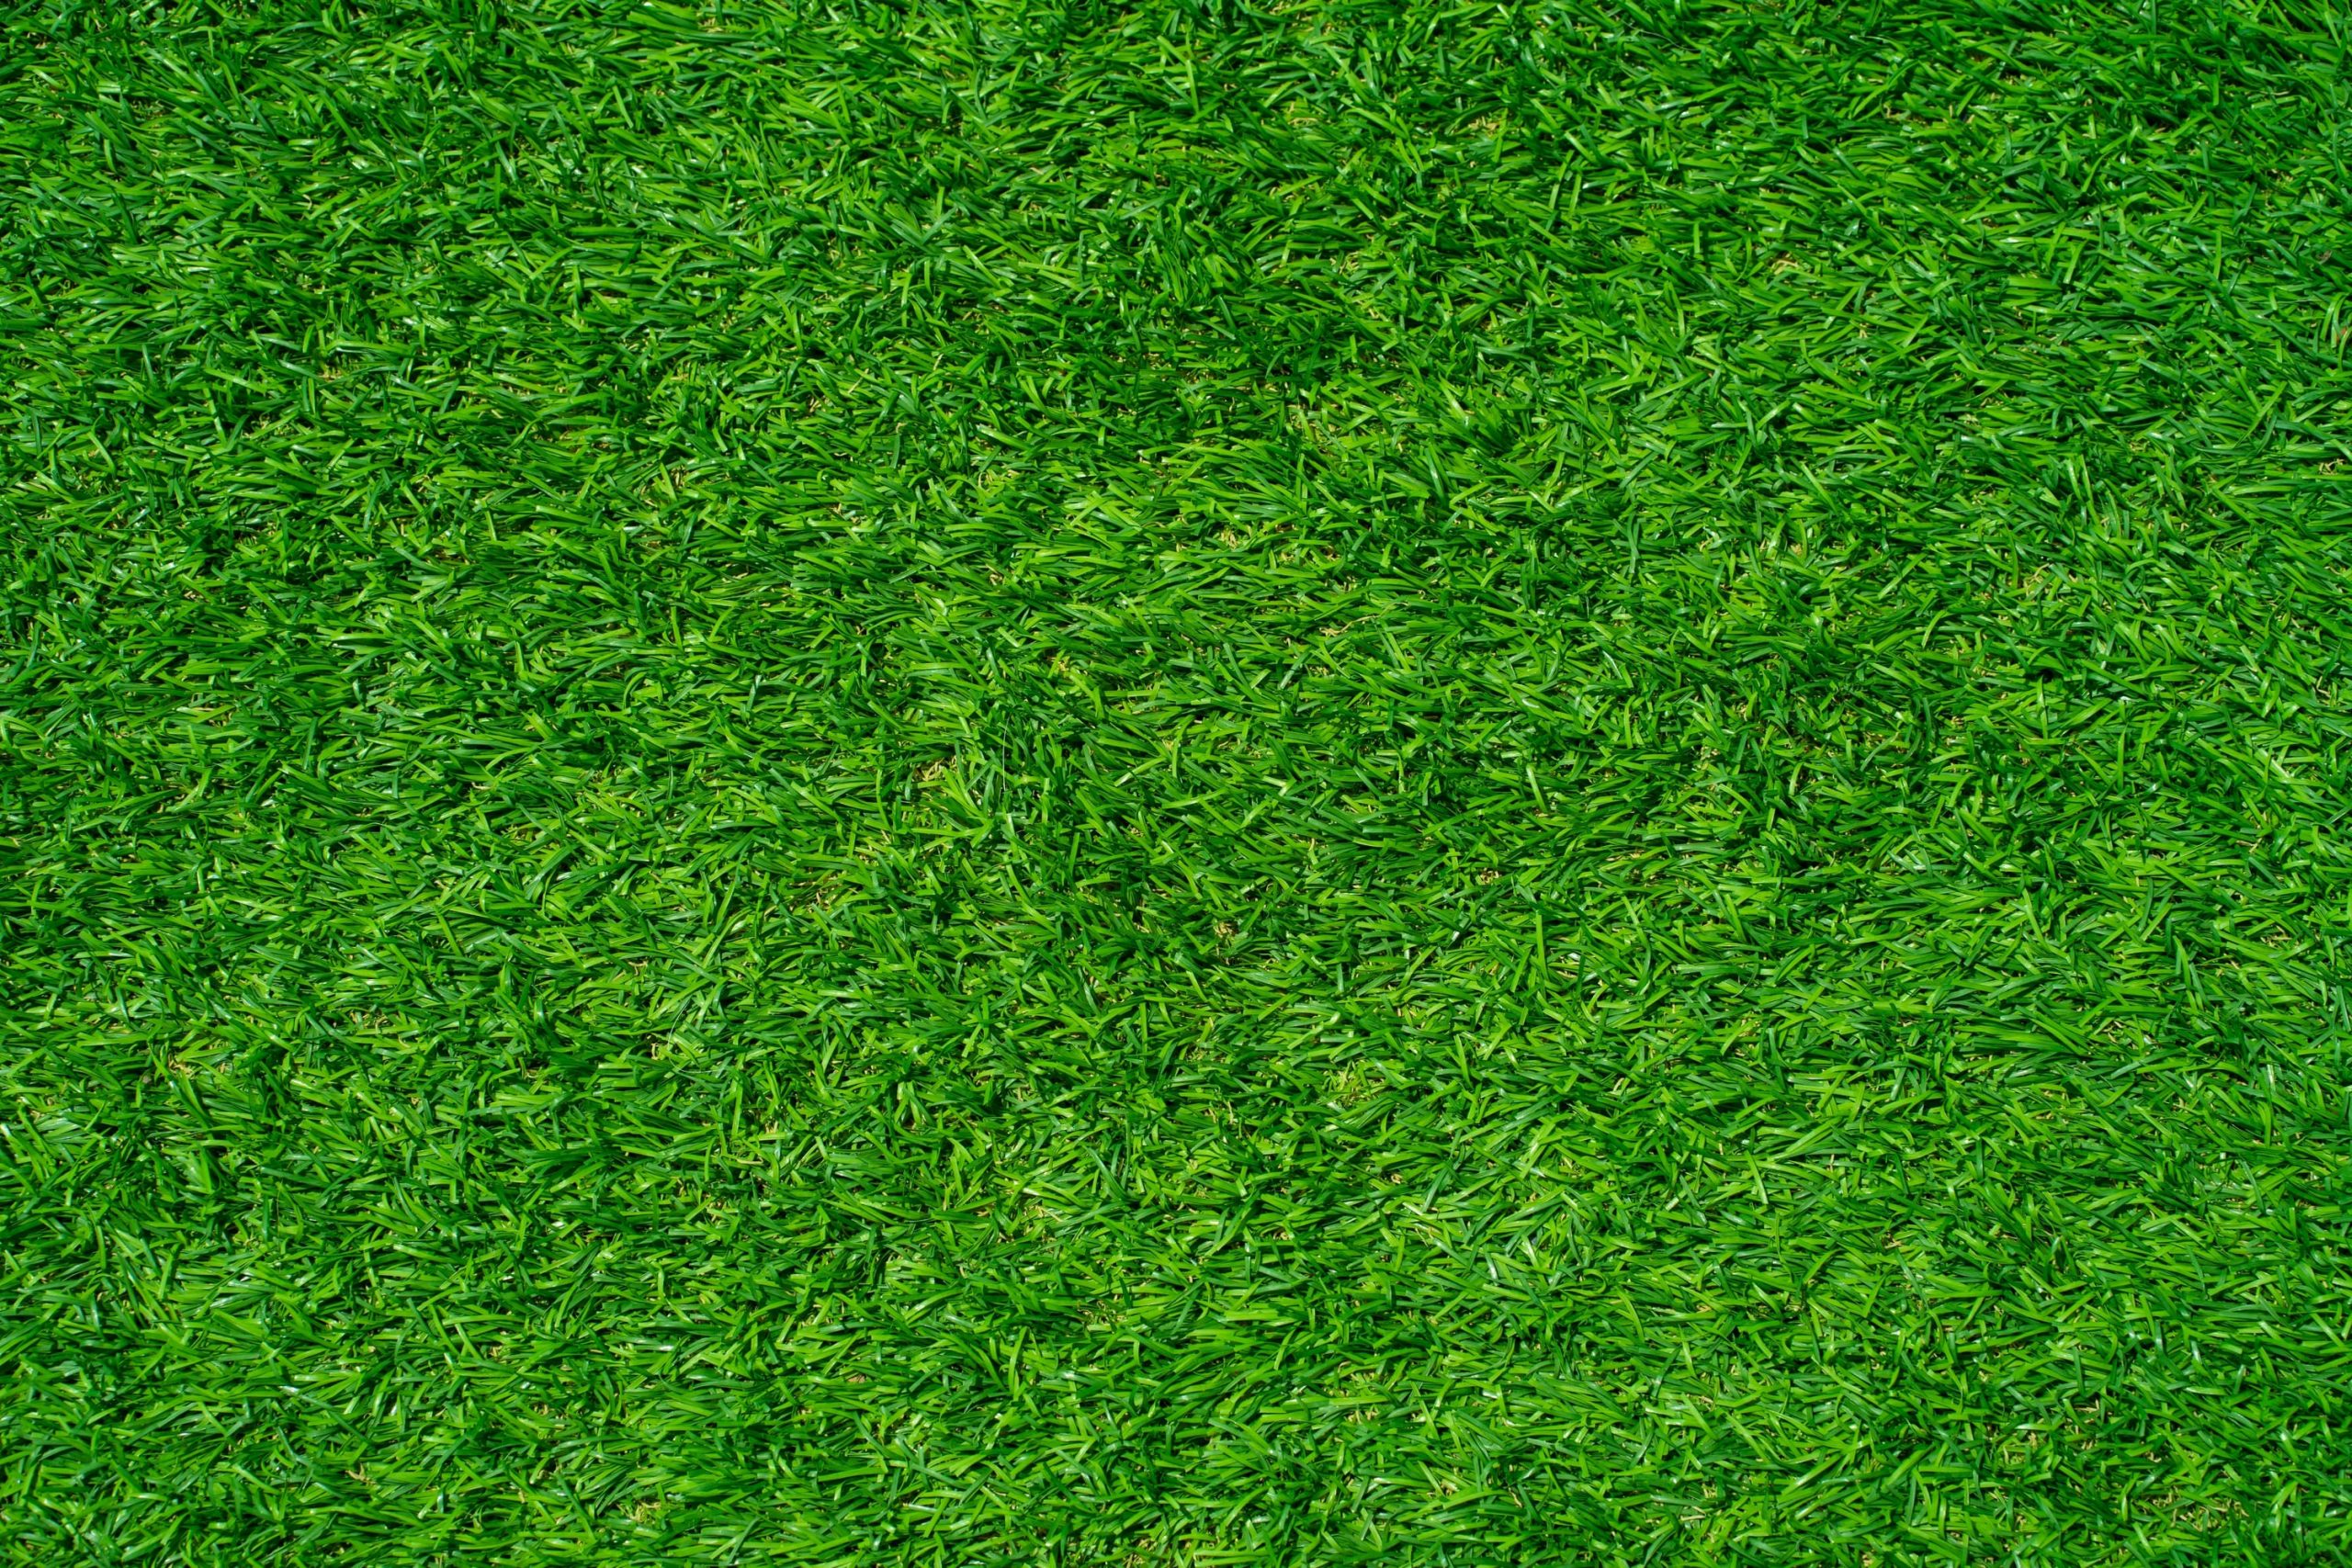 How much does it cost to install artificial grass in Australia and what are the advantages and disadvantages?